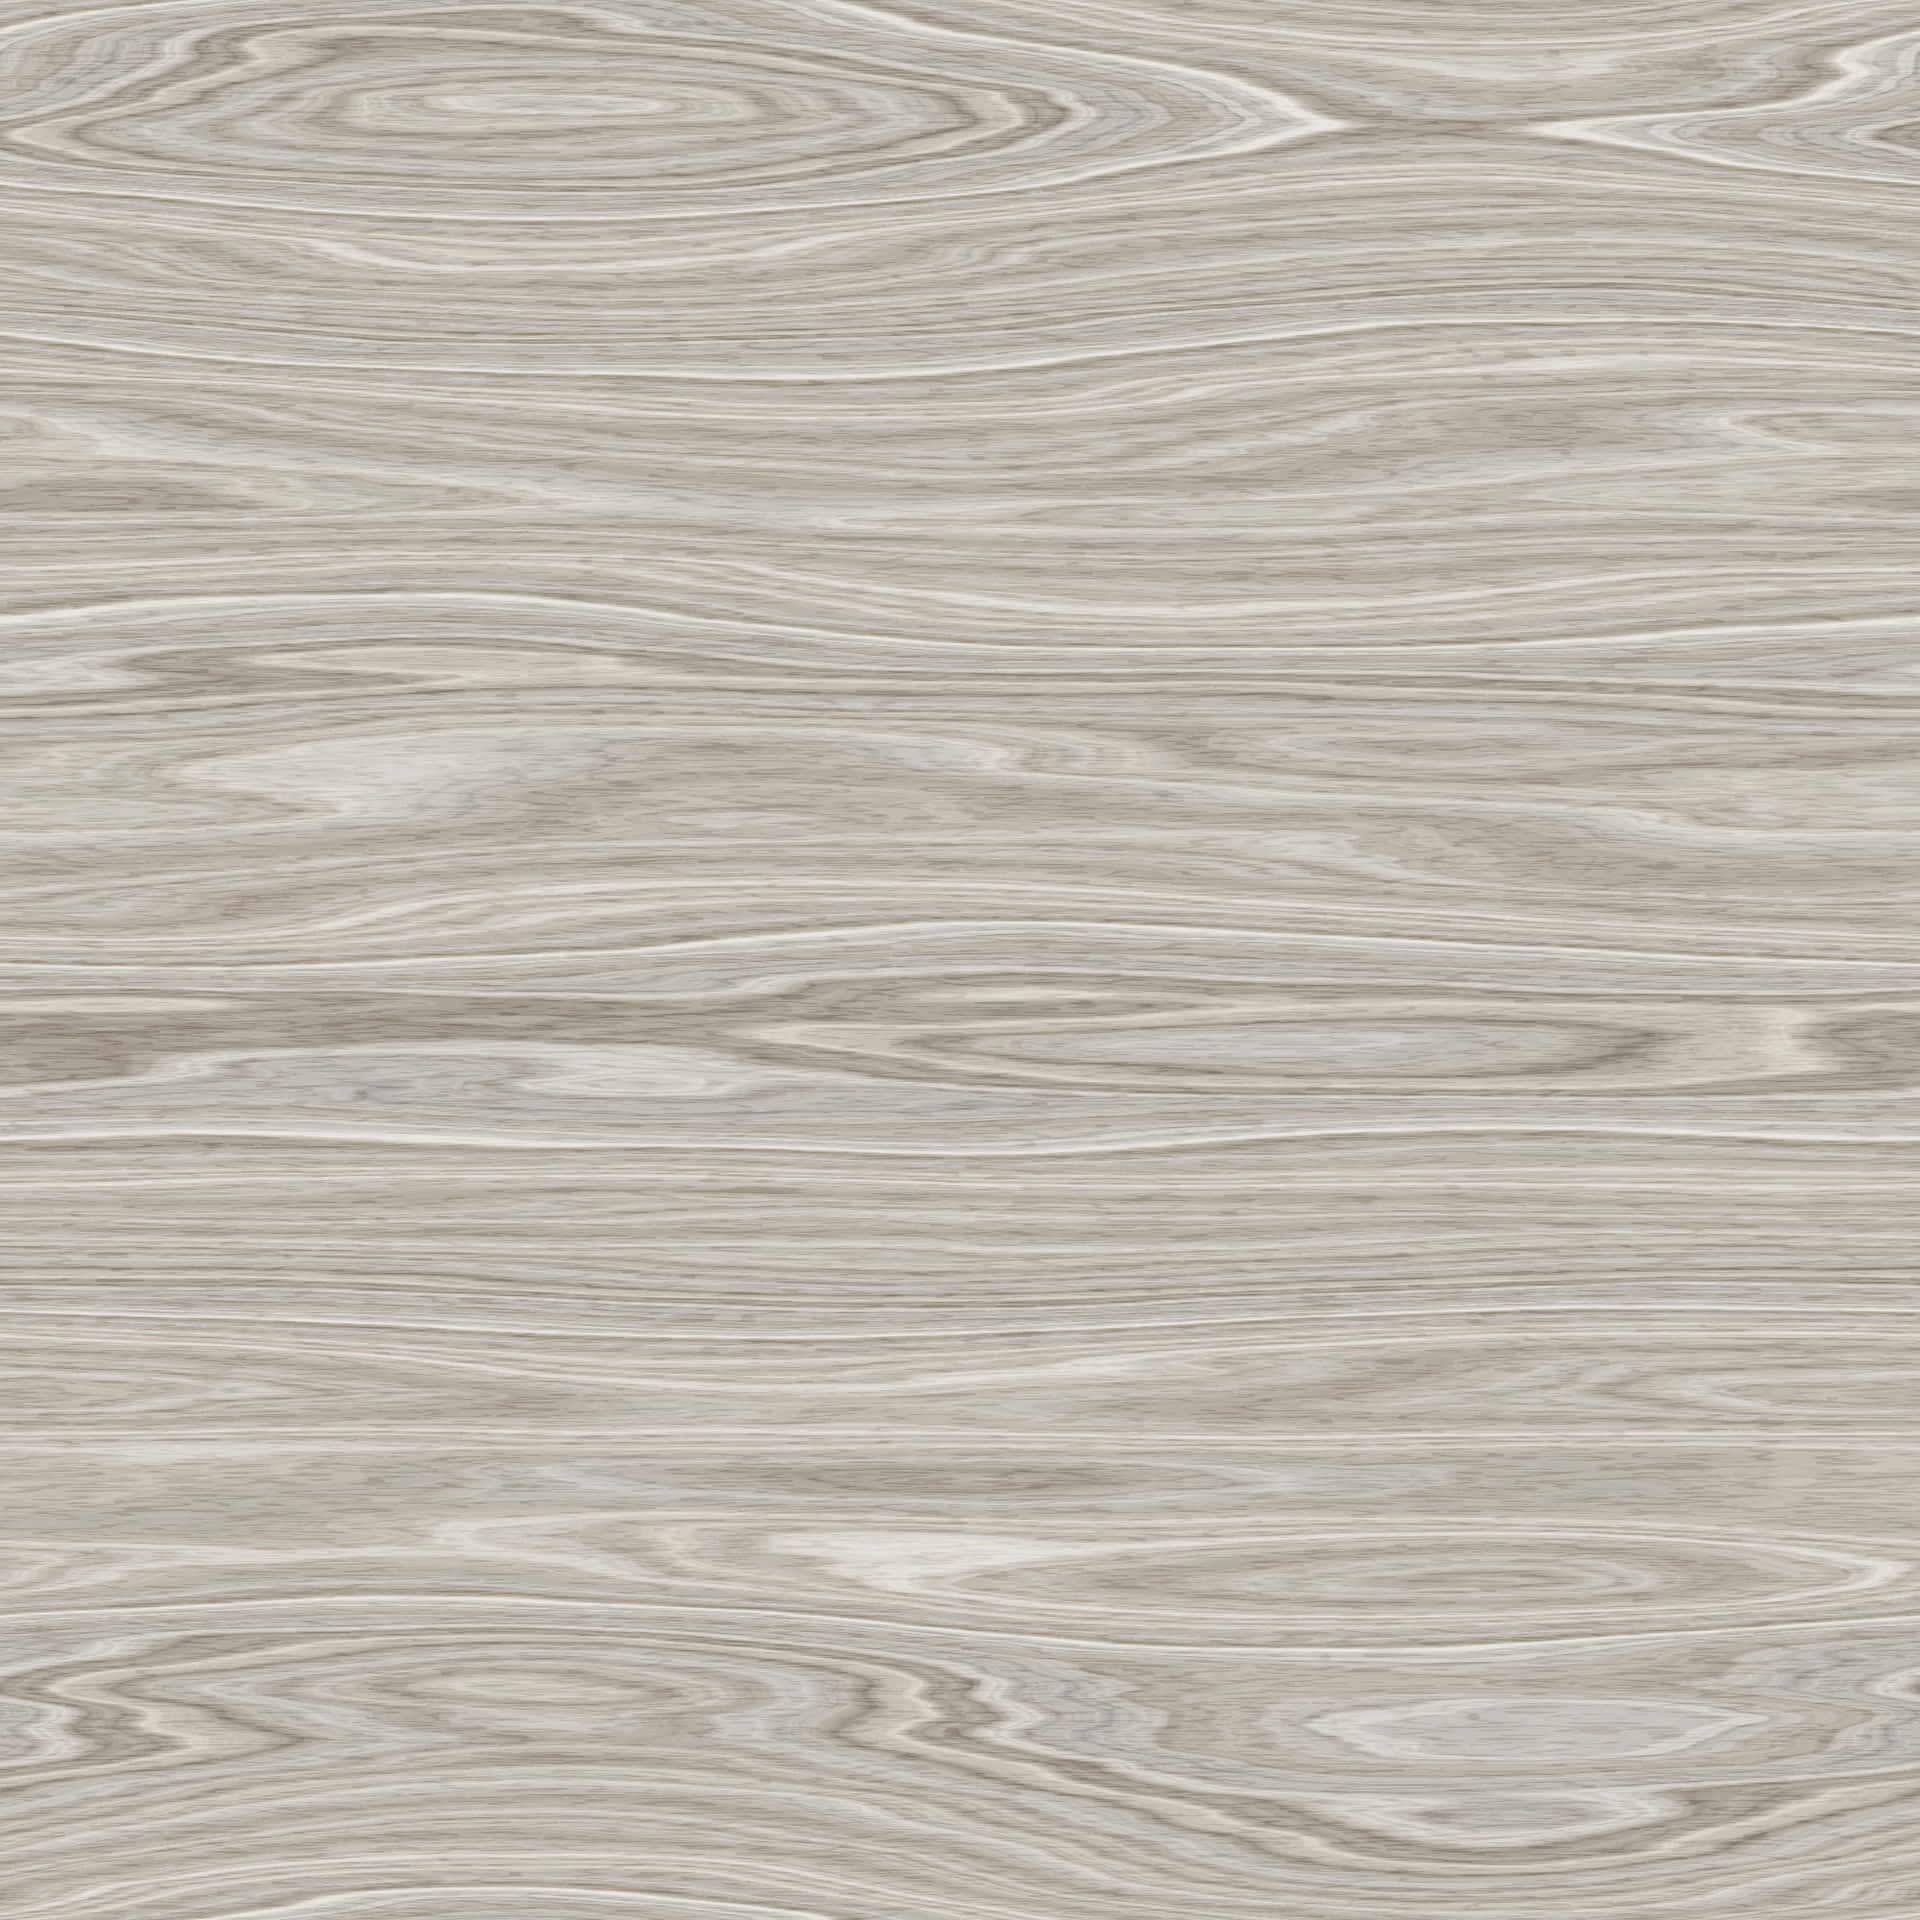 A White And Gray Wood Texture Background